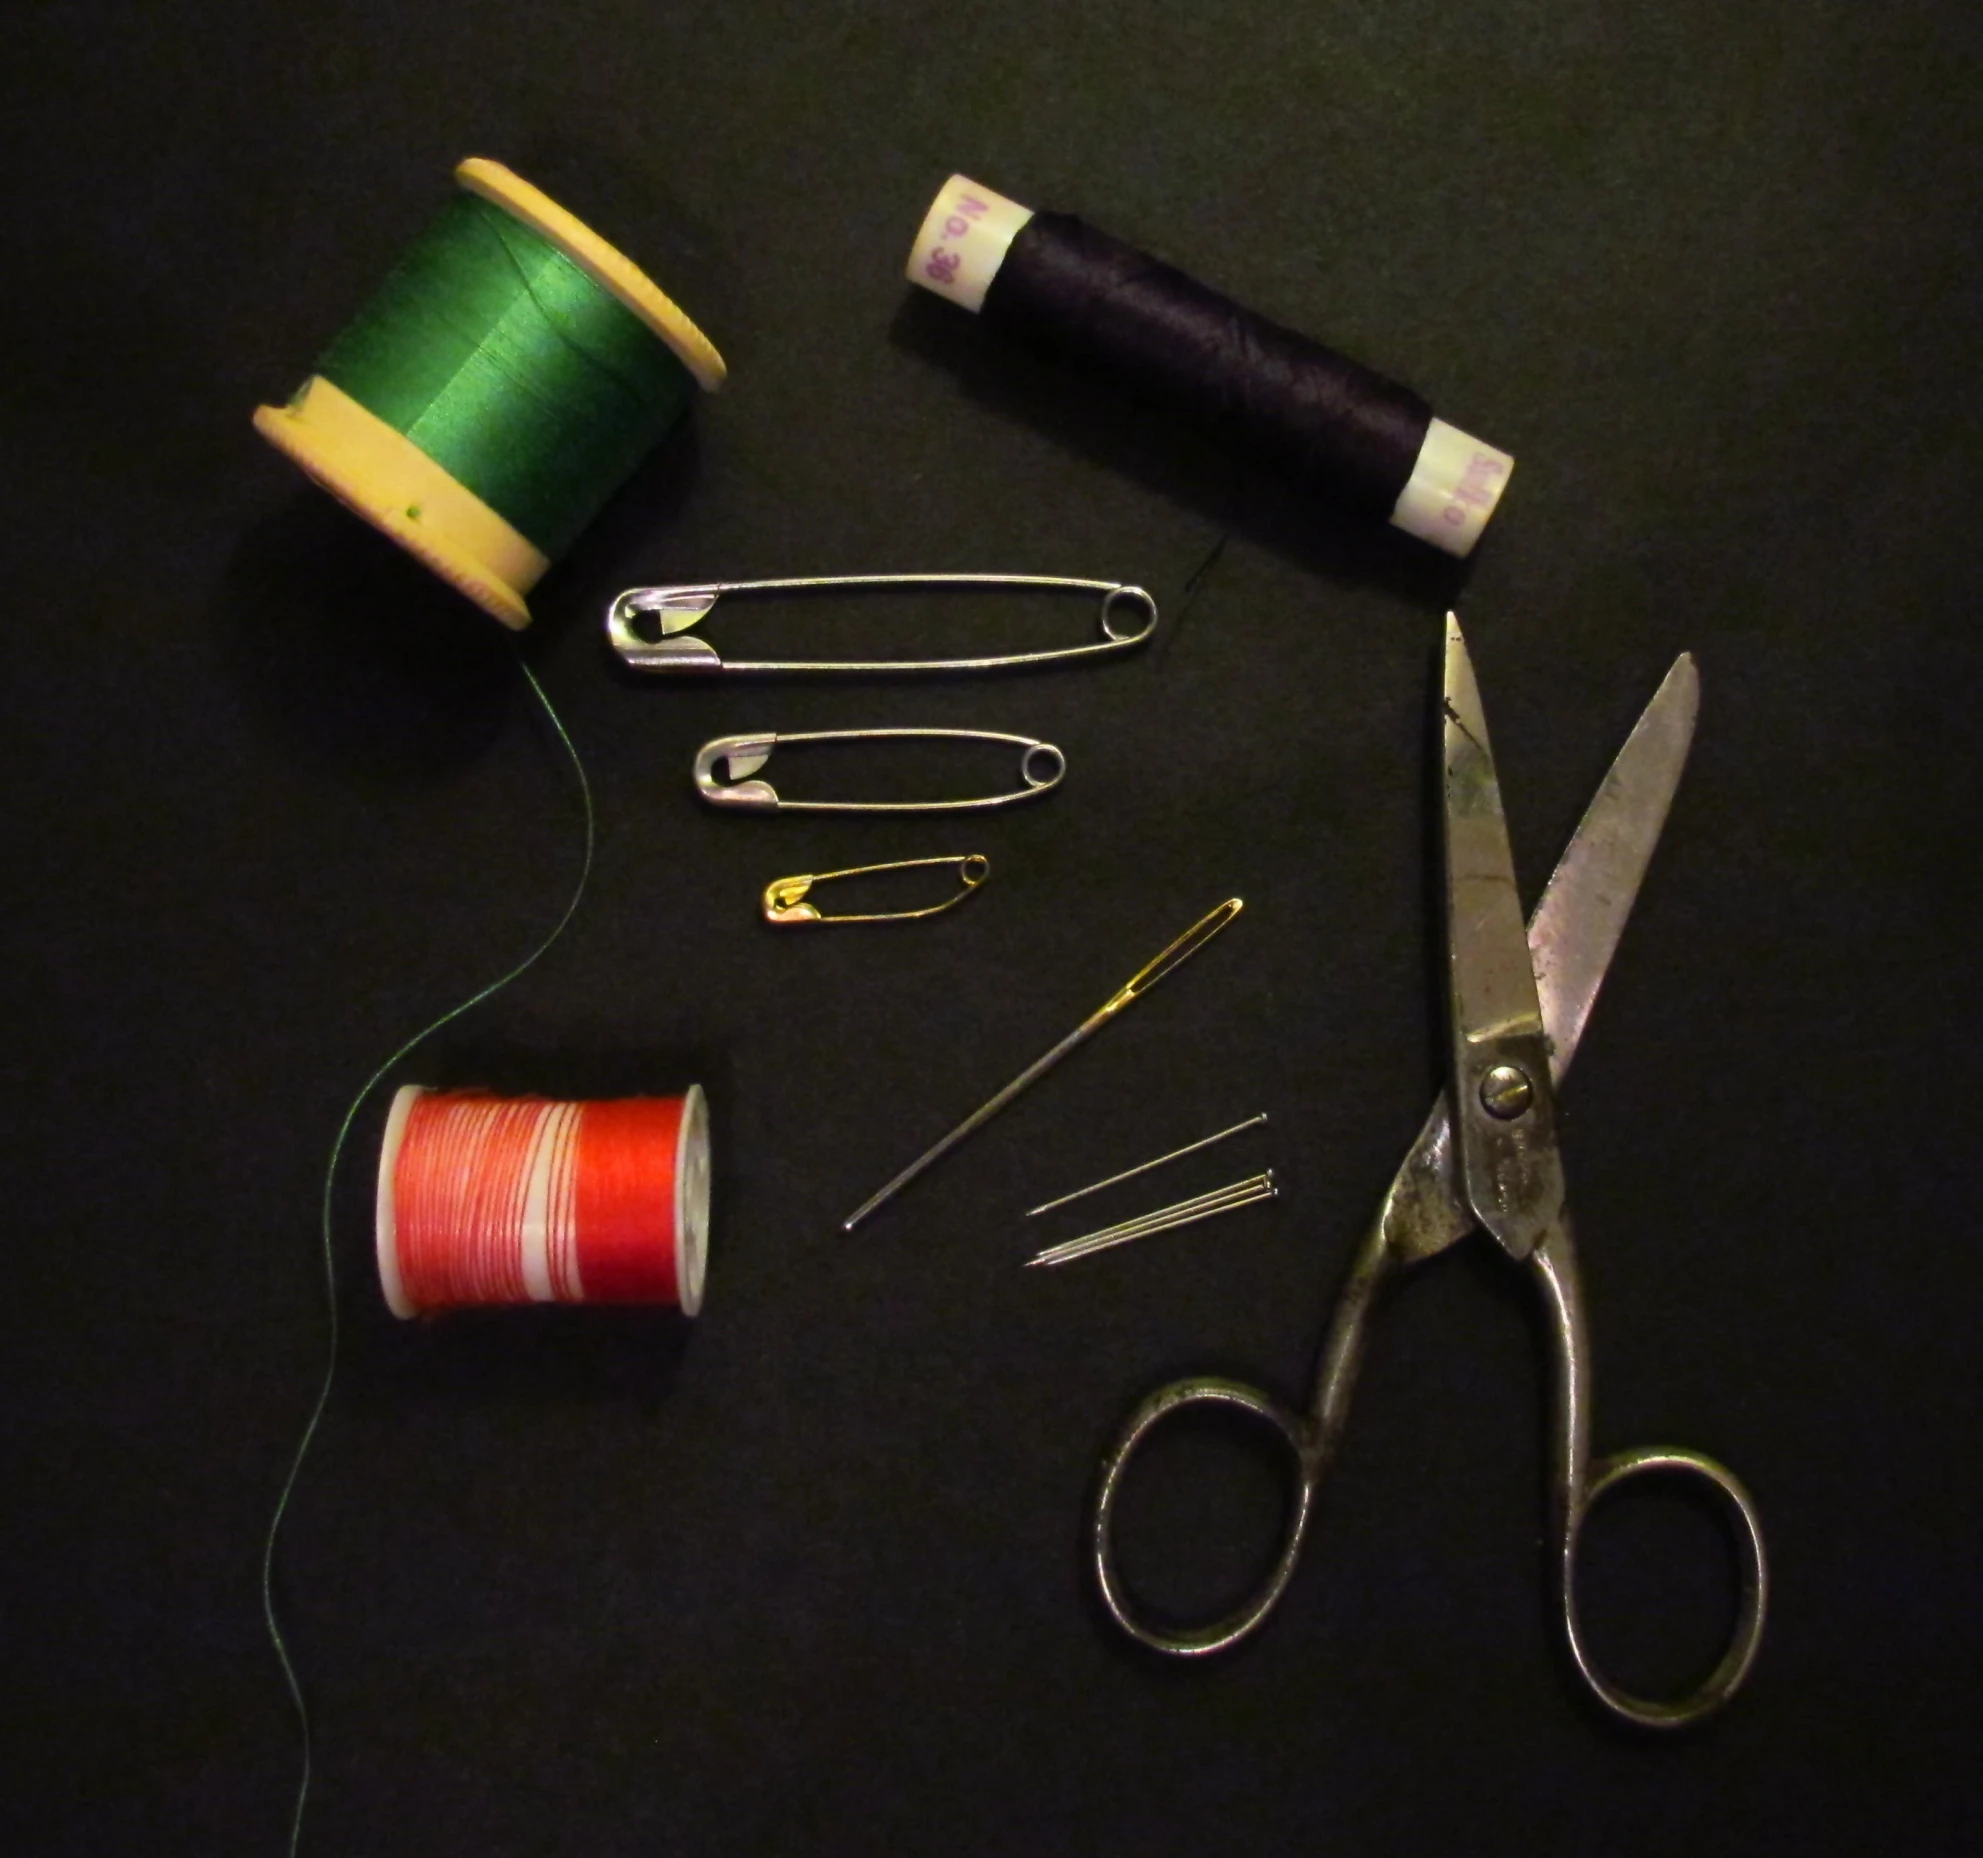 a pair of scissors and thread with the other items for sewing